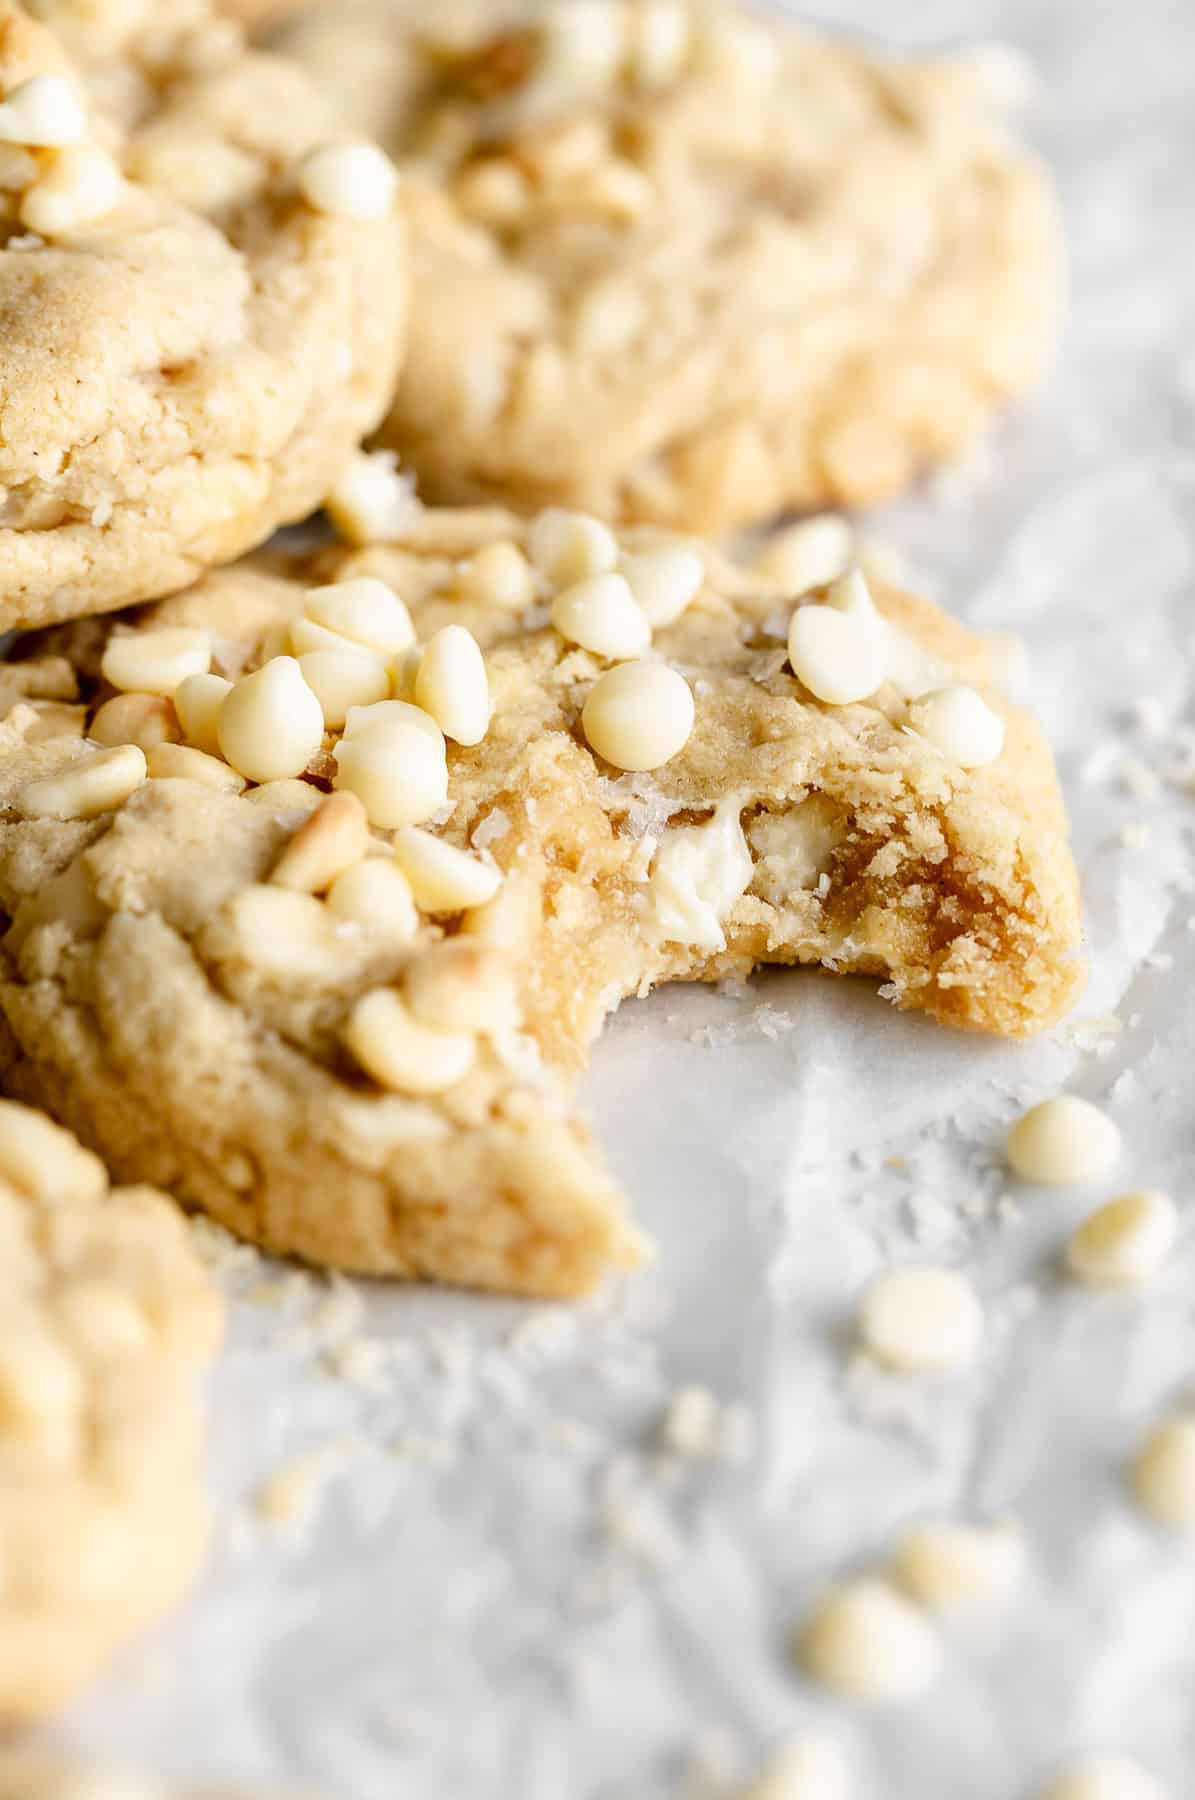 white chocolate macadamia gluten free cookies with a bite taken out